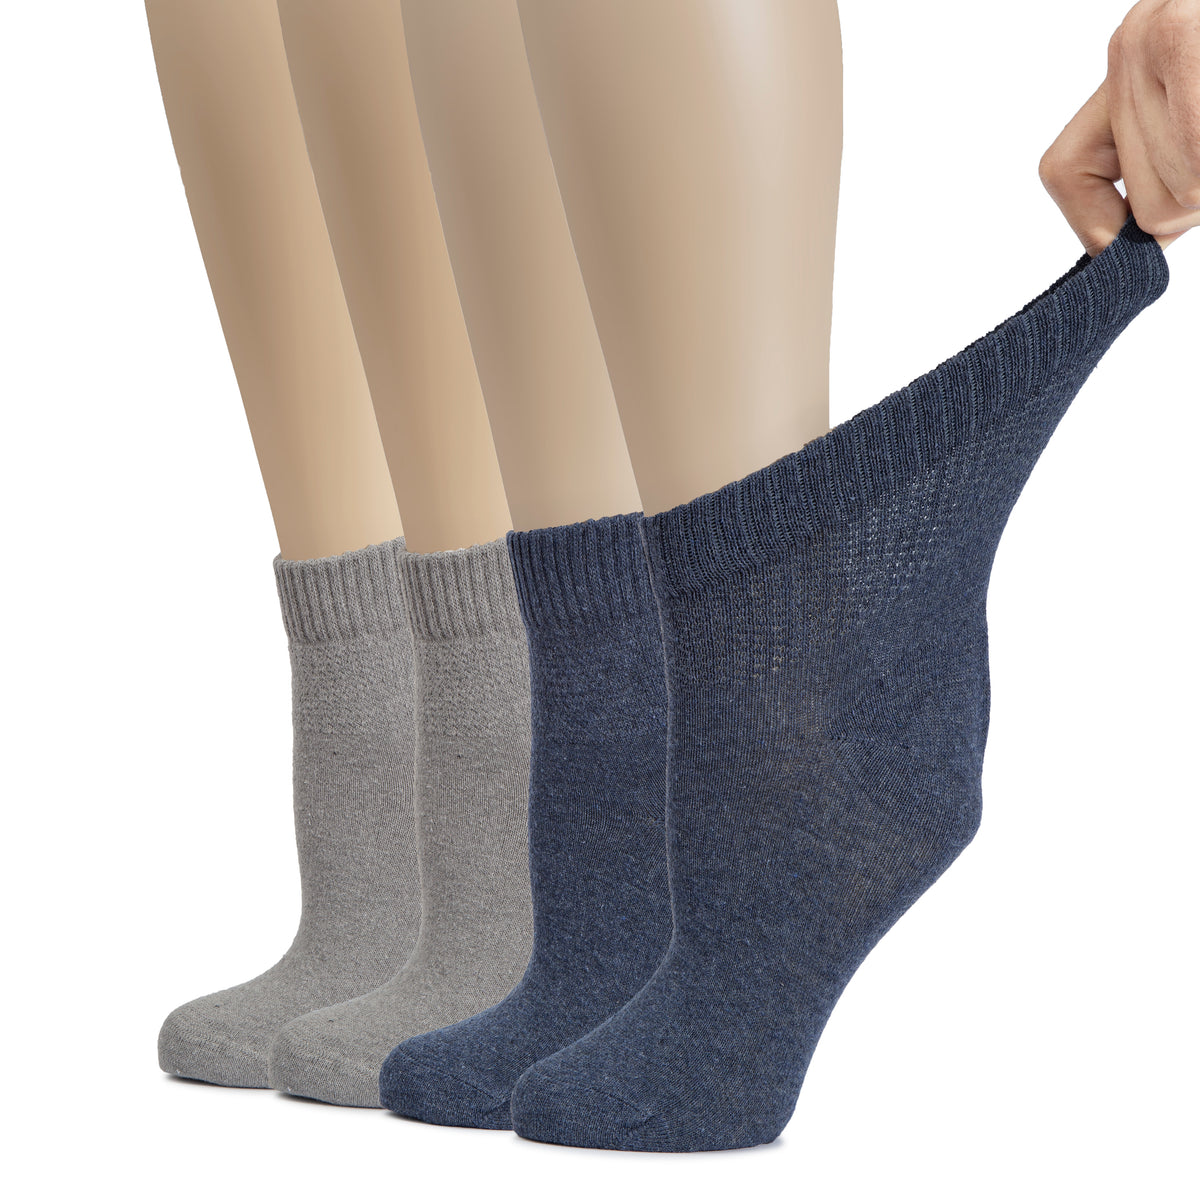 Hugh Ugoli Cotton Diabetic Women's Socks, Ankle Height, Loose, Wide Stretchy, Thin, Seamless Toe and Non-Binding Top, 4 Pairs | Shoe Size: 10-12 | Charcoal / MelangeGrey